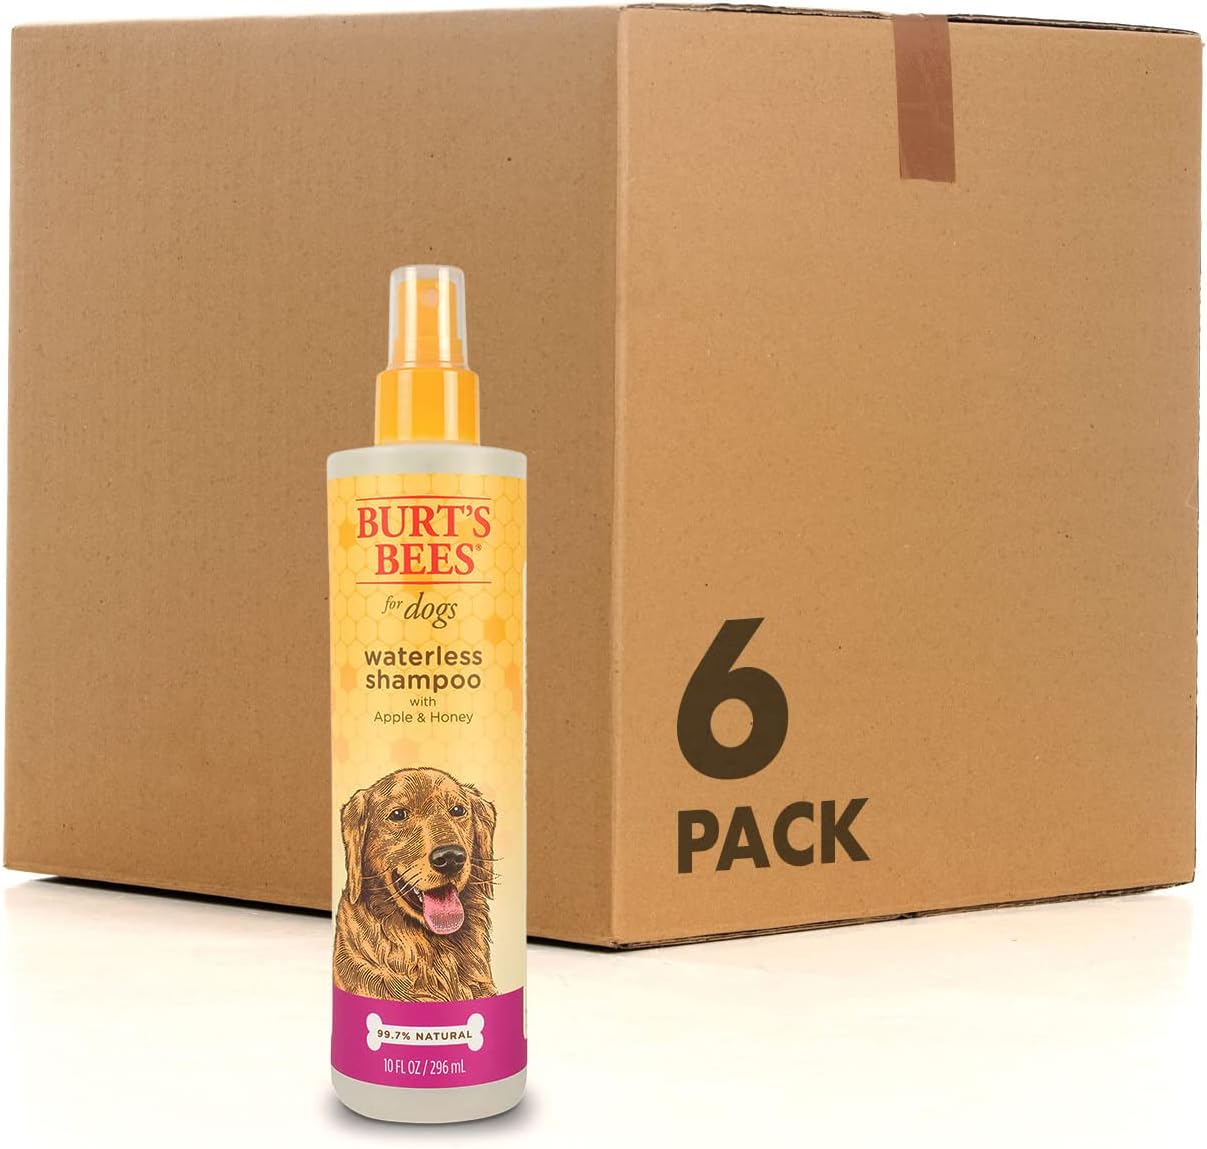 Burt's Bees for Pets Natural Waterless Shampoo Spray for Dogs | Made with Apple and Honey | Easy Way to Bathe Your Dog Naturally | Cruelty Free, Sulfate & Paraben Free, Made in USA - 10 oz - 6 Pack